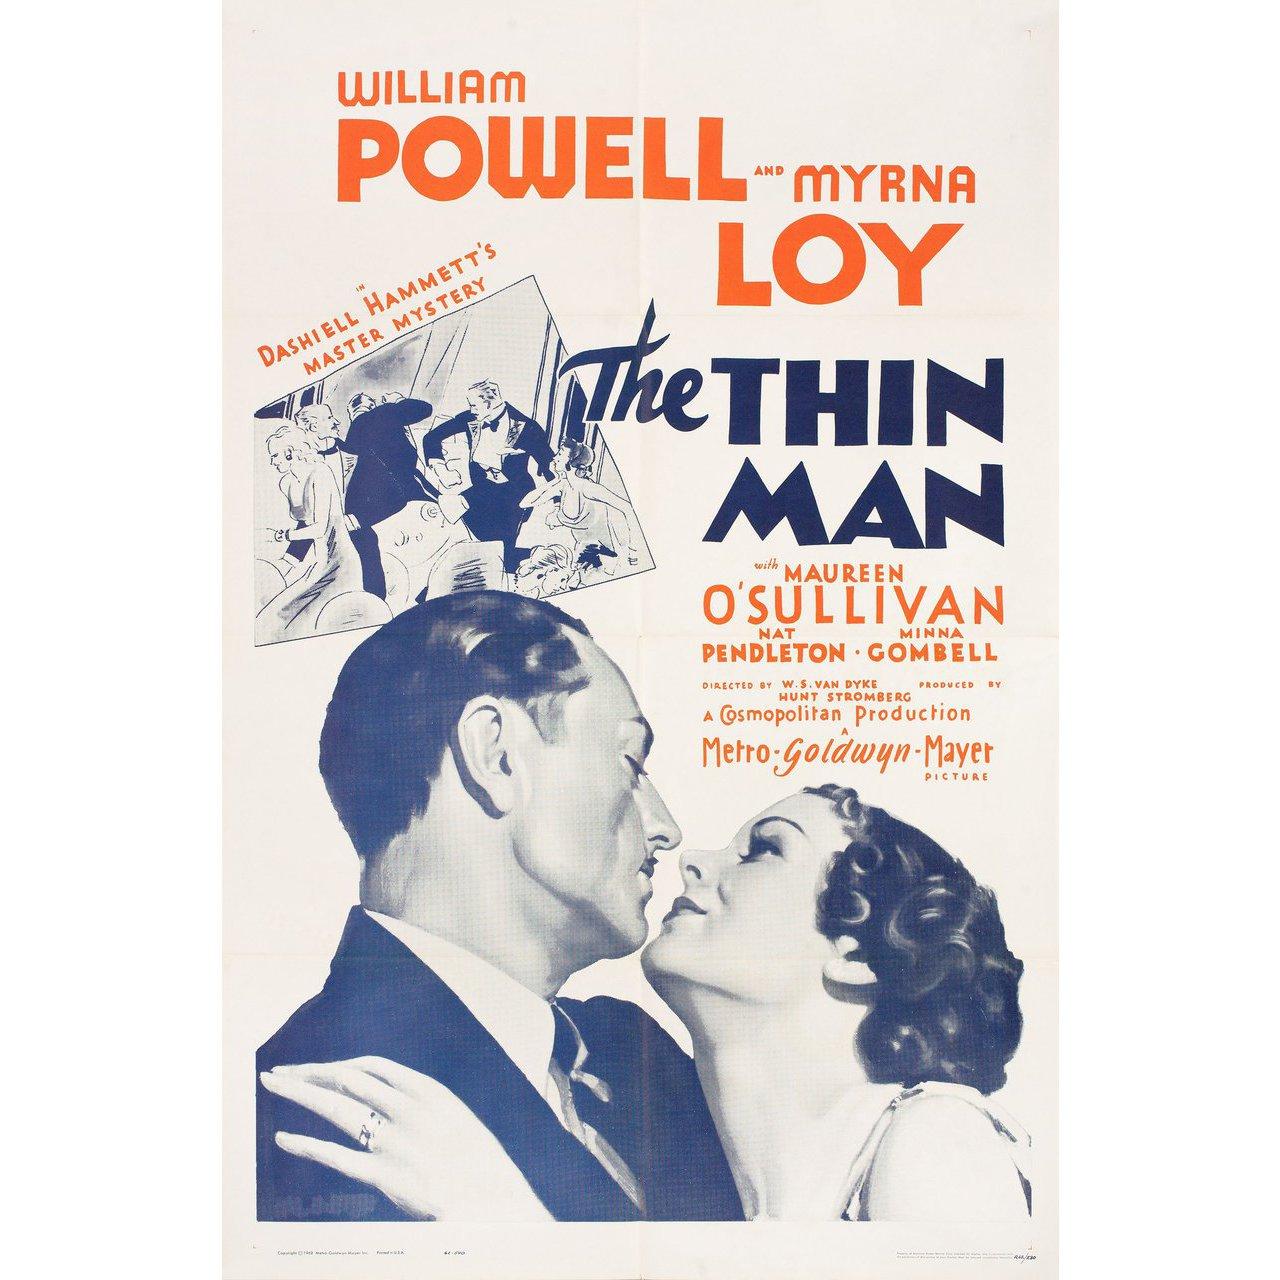 Original 1962 re-release U.S. one sheet poster for the 1934 film The Thin Man directed by W.S. Van Dyke with William Powell / Myrna Loy / Maureen O'Sullivan / Nat Pendleton. Very Good-Fine condition, folded. Many original posters were issued folded